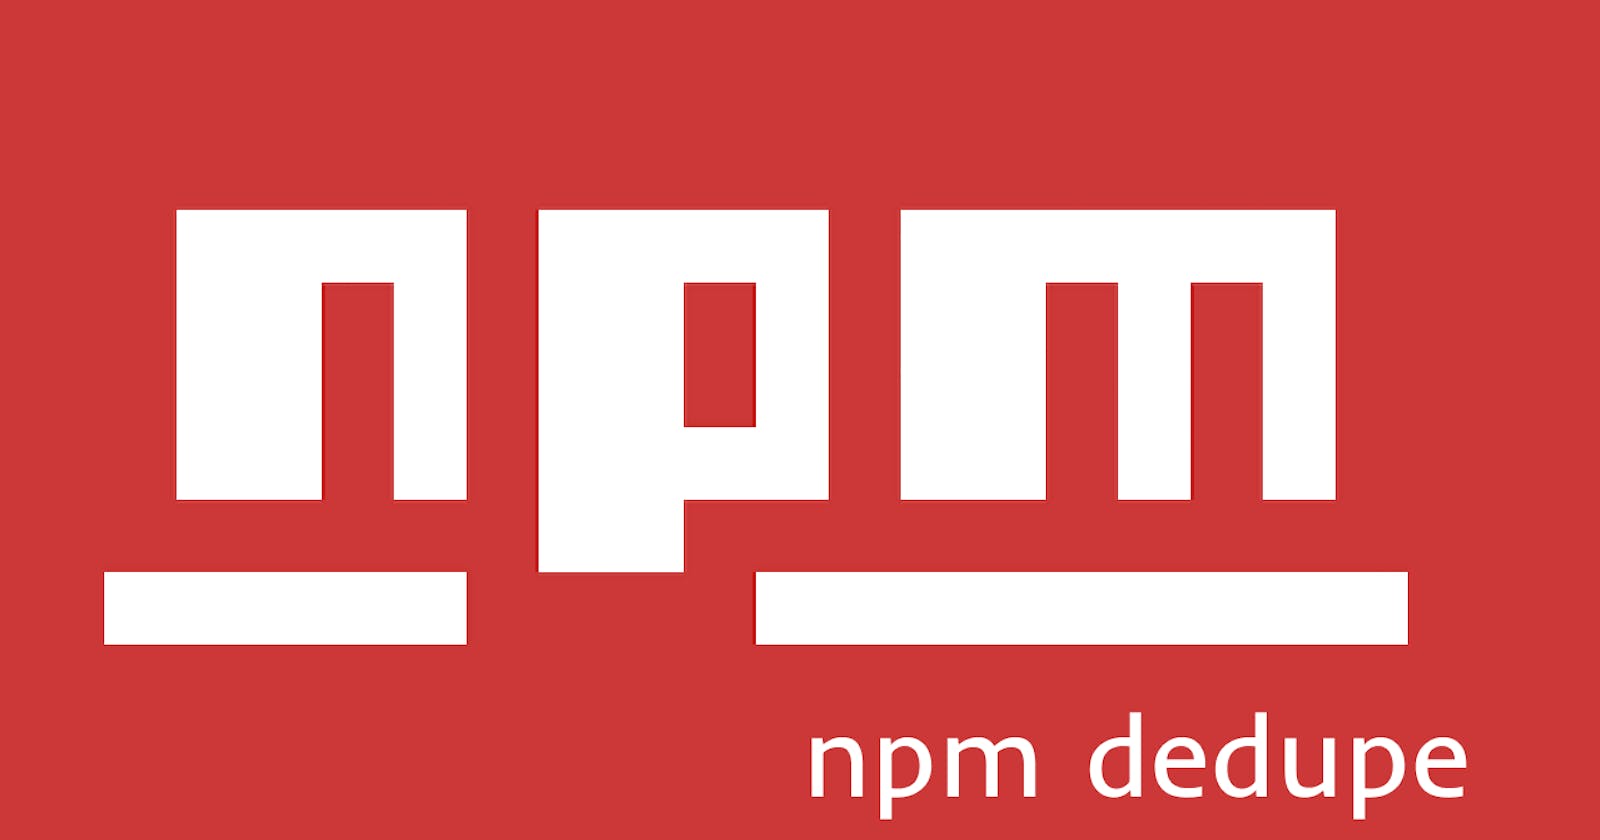 Resolving Conflicts and Streamlining Dependency Tree with npm dedupe